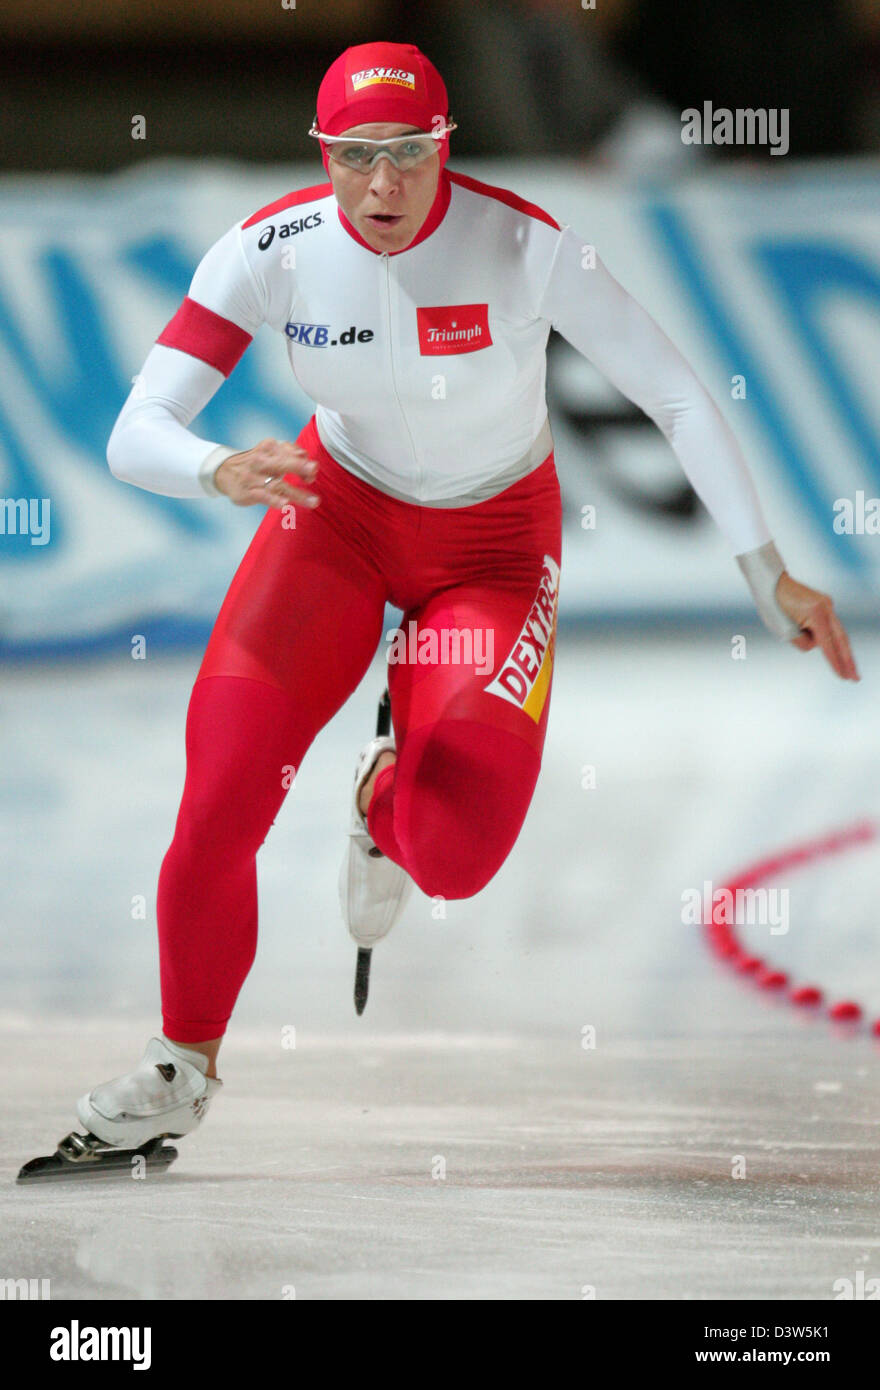 German speed skater Anni Friesinger shown in action during the 500m race of the allround competition of the German Championship 2006 at the 'Sportforum' ice rink in Berlin, Friday, 29 December 2006. Friesinger won the 500m in 39,16 seconds. Photo: Miguel Villagran Stock Photo